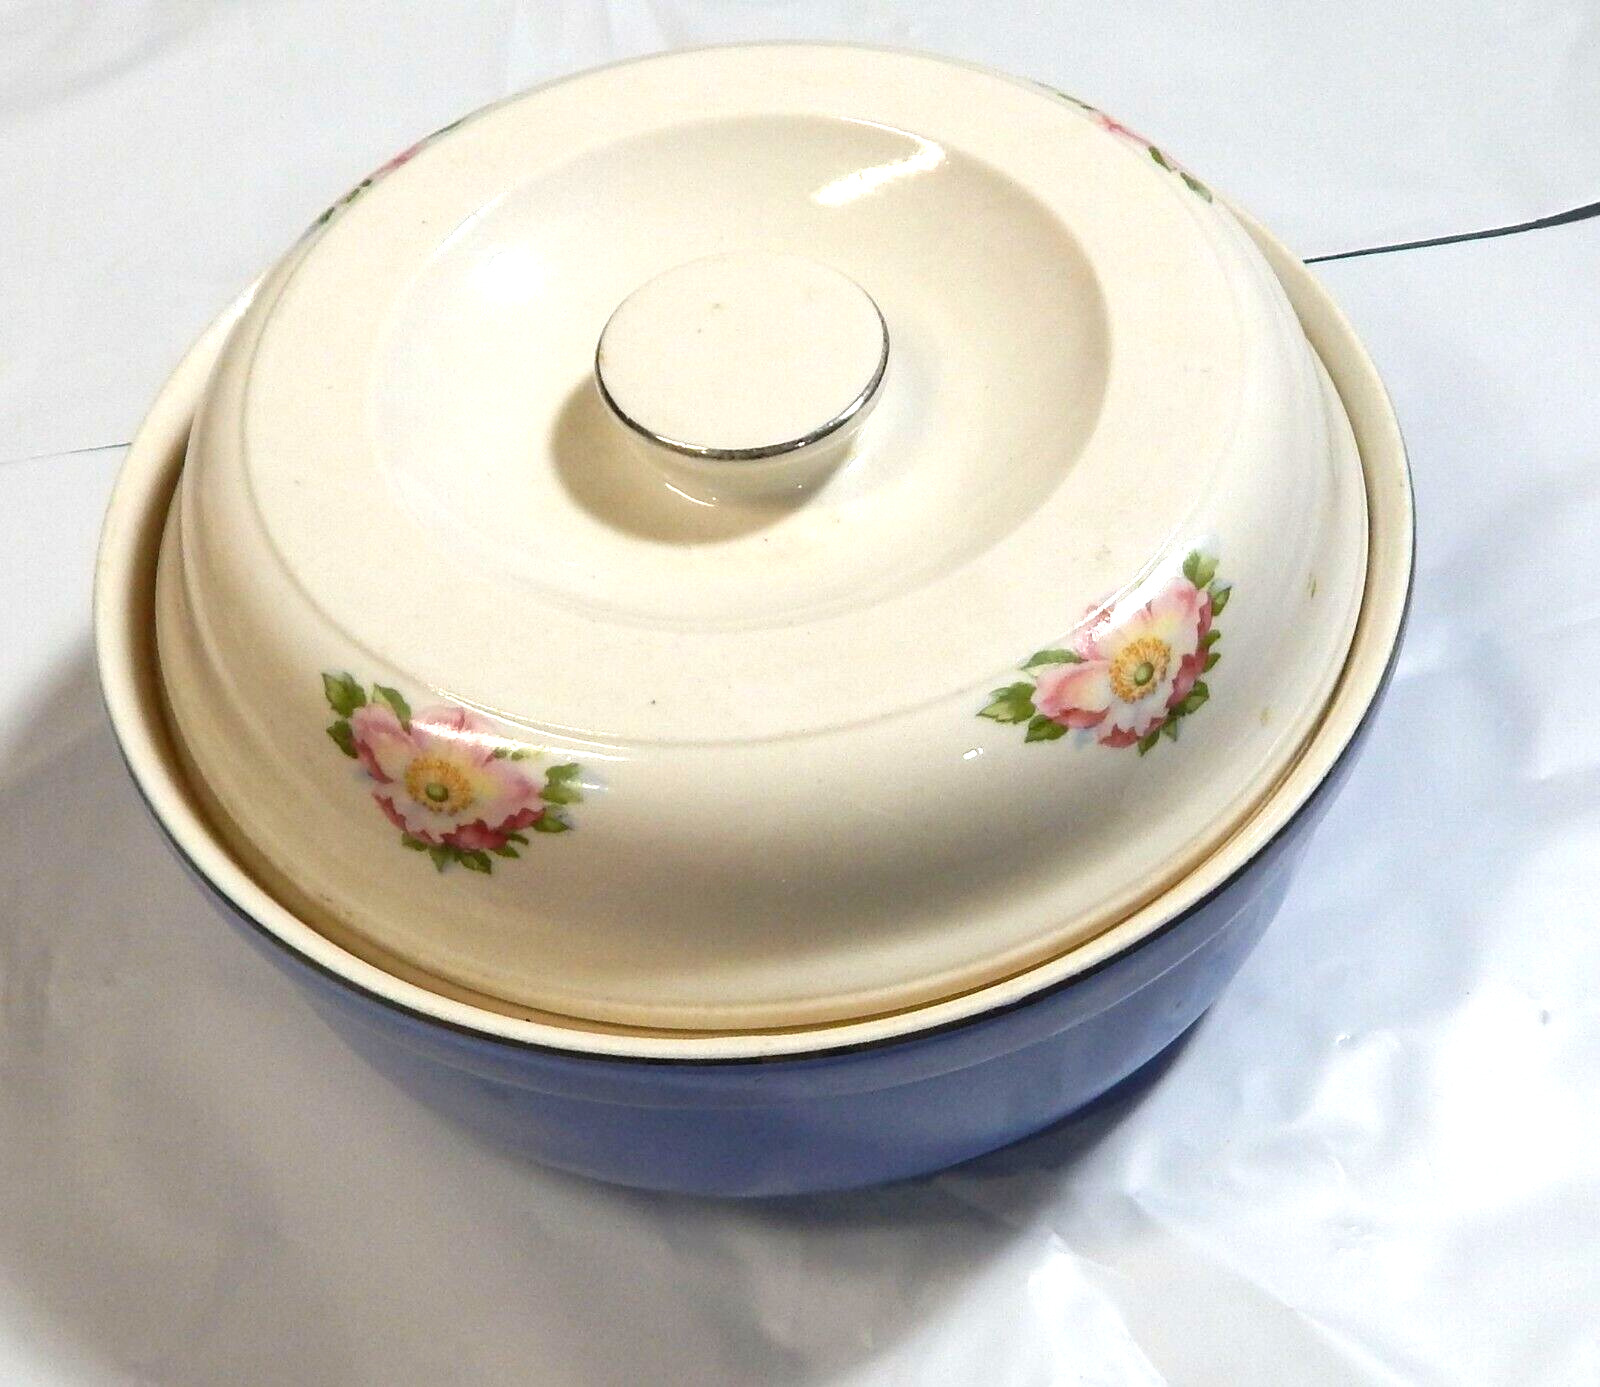 Vintage Hall's Superior Quality Kitchenware Royal Rose Covered Casserole Dish